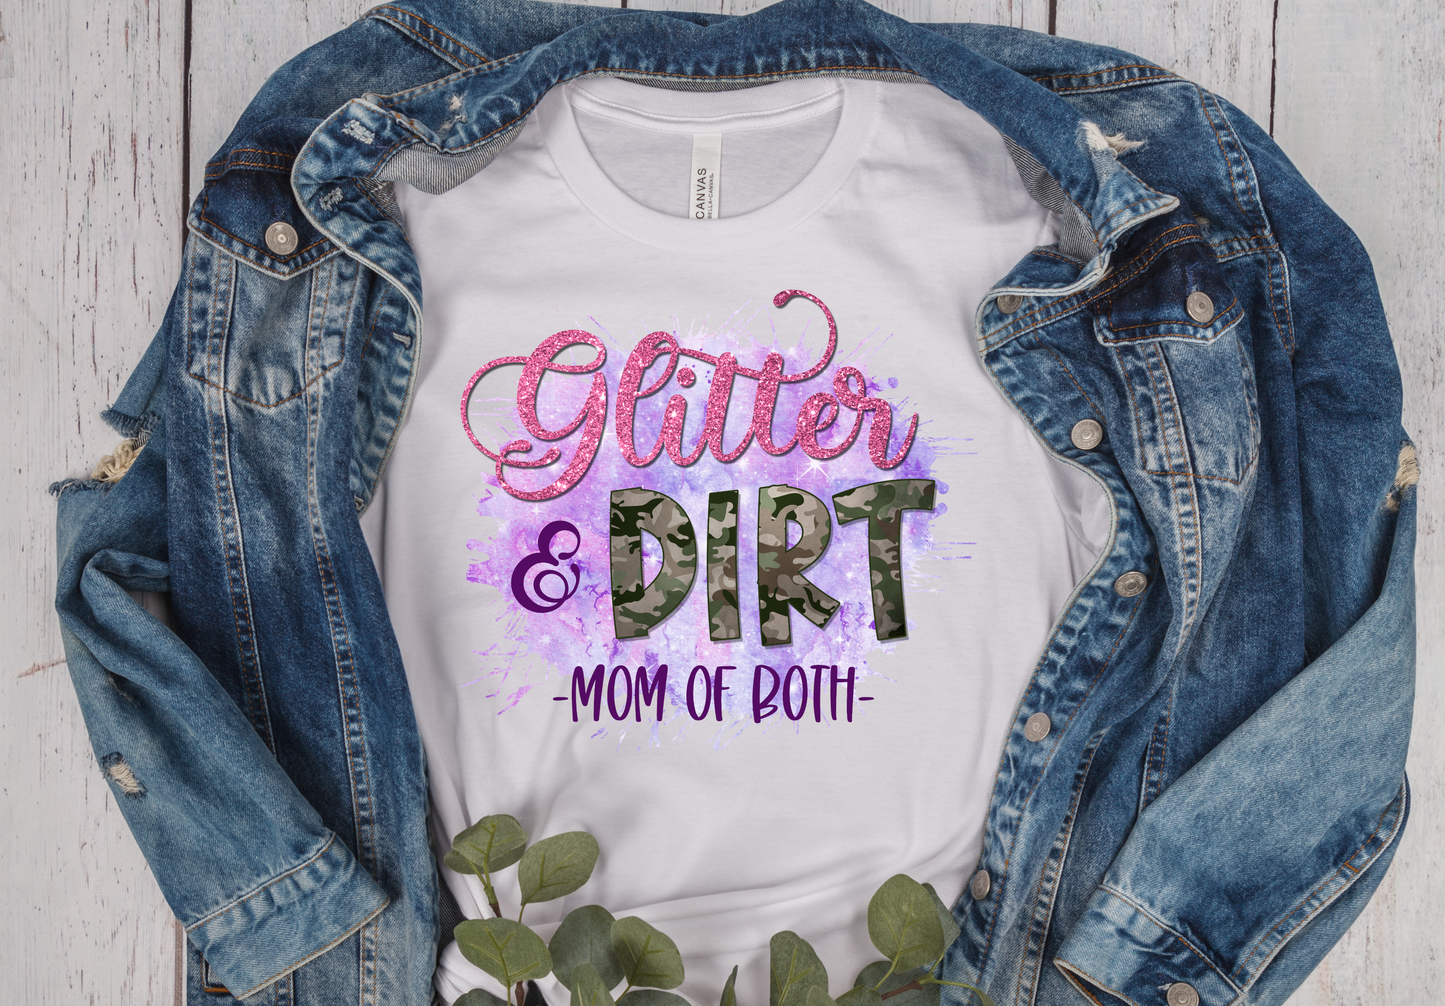 Glitter and Dirt Mom of Both T-Shirt